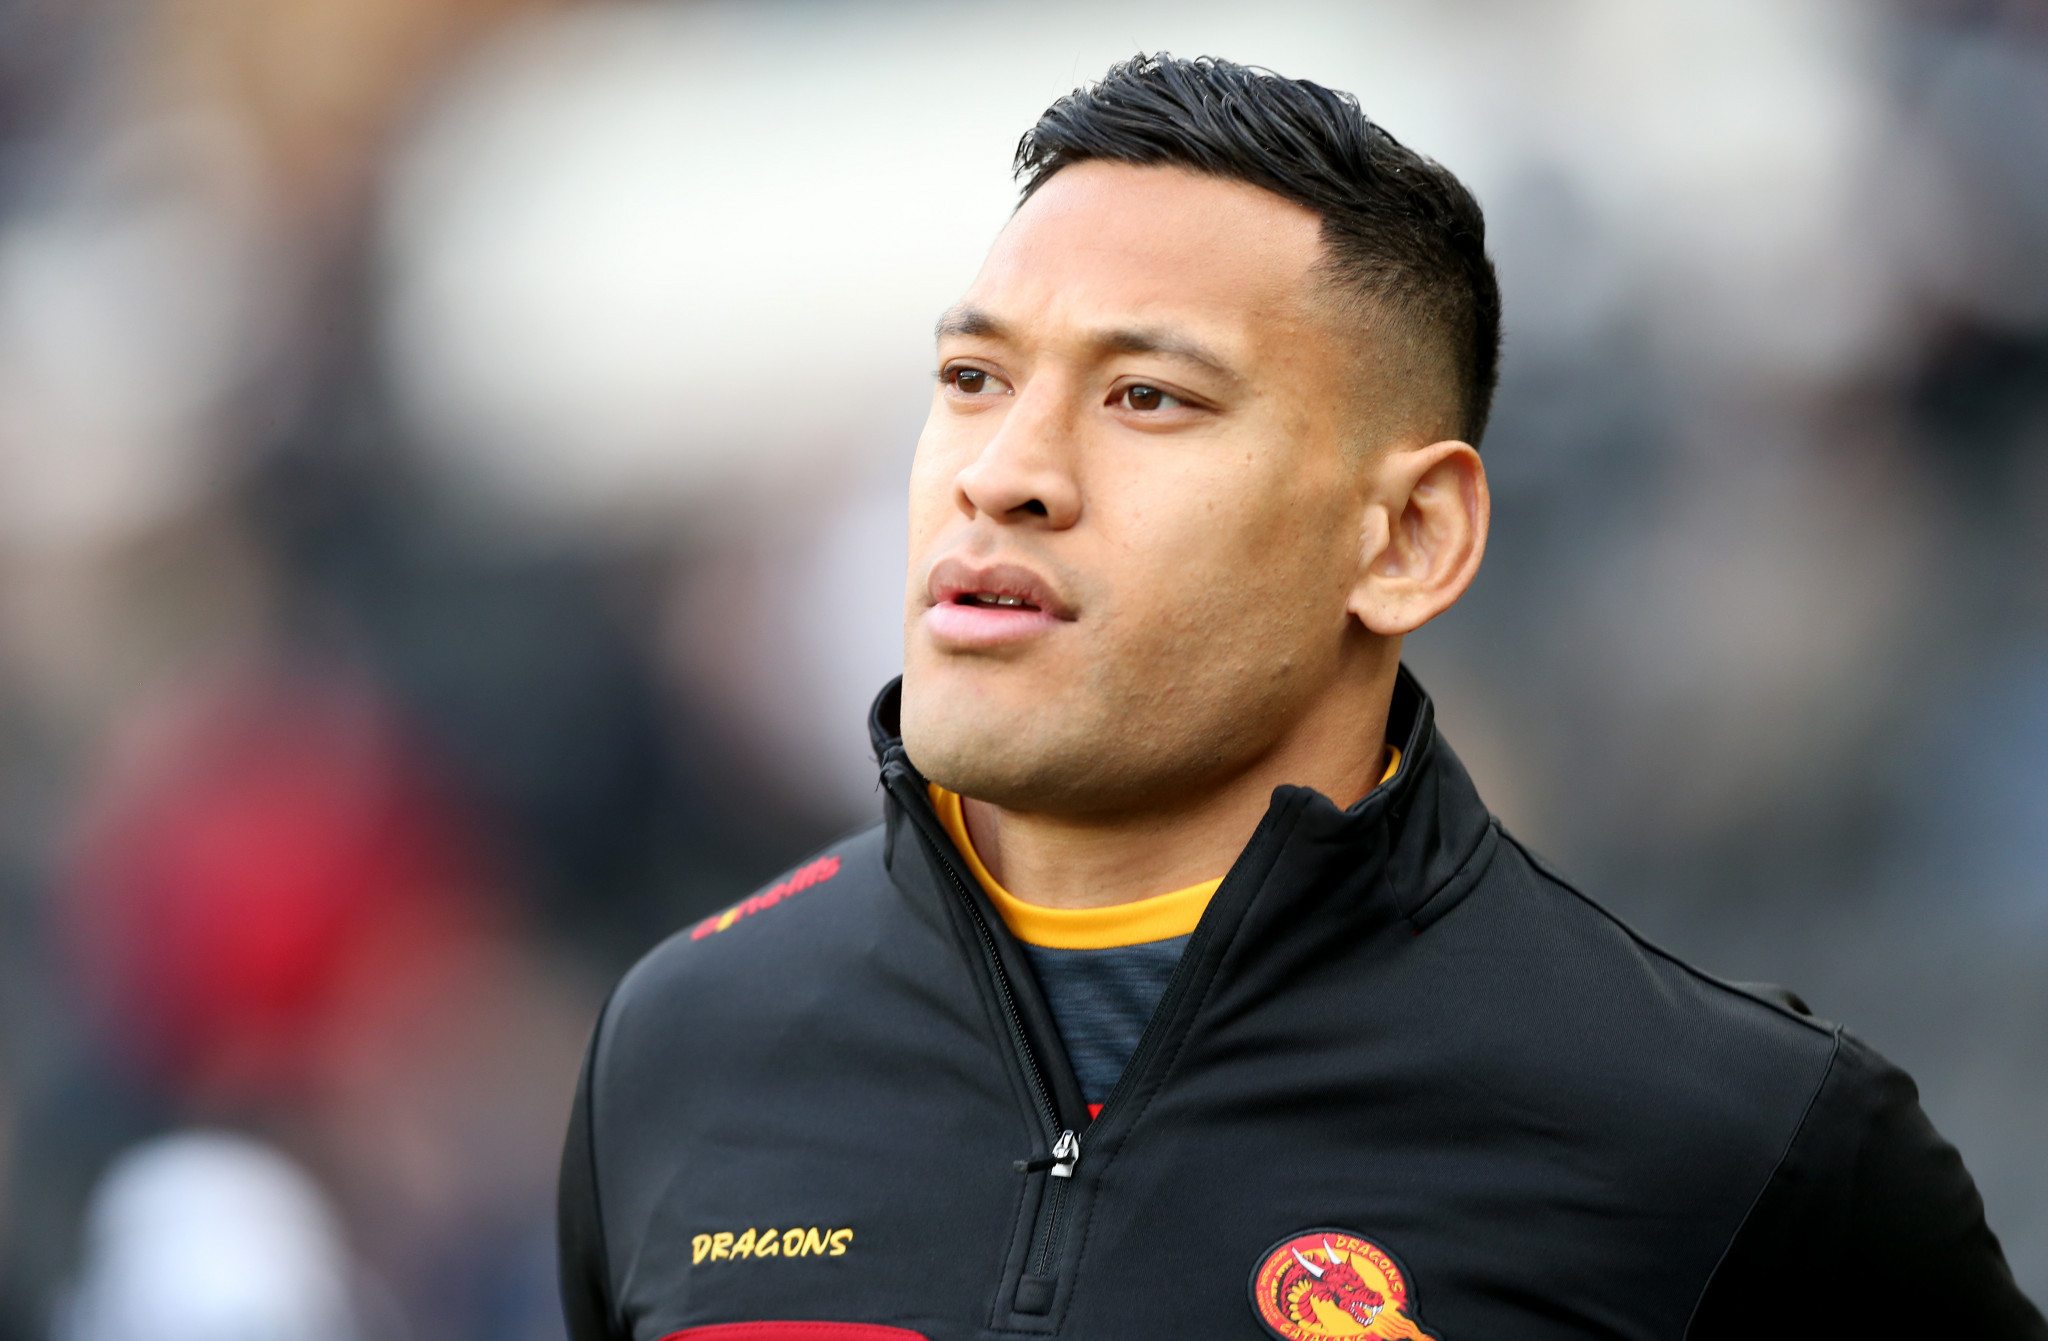 Rugby Australia claimed their significant financial deficit in 2019 is partly down to the legal settlement with player Israel Folau ©Getty Images